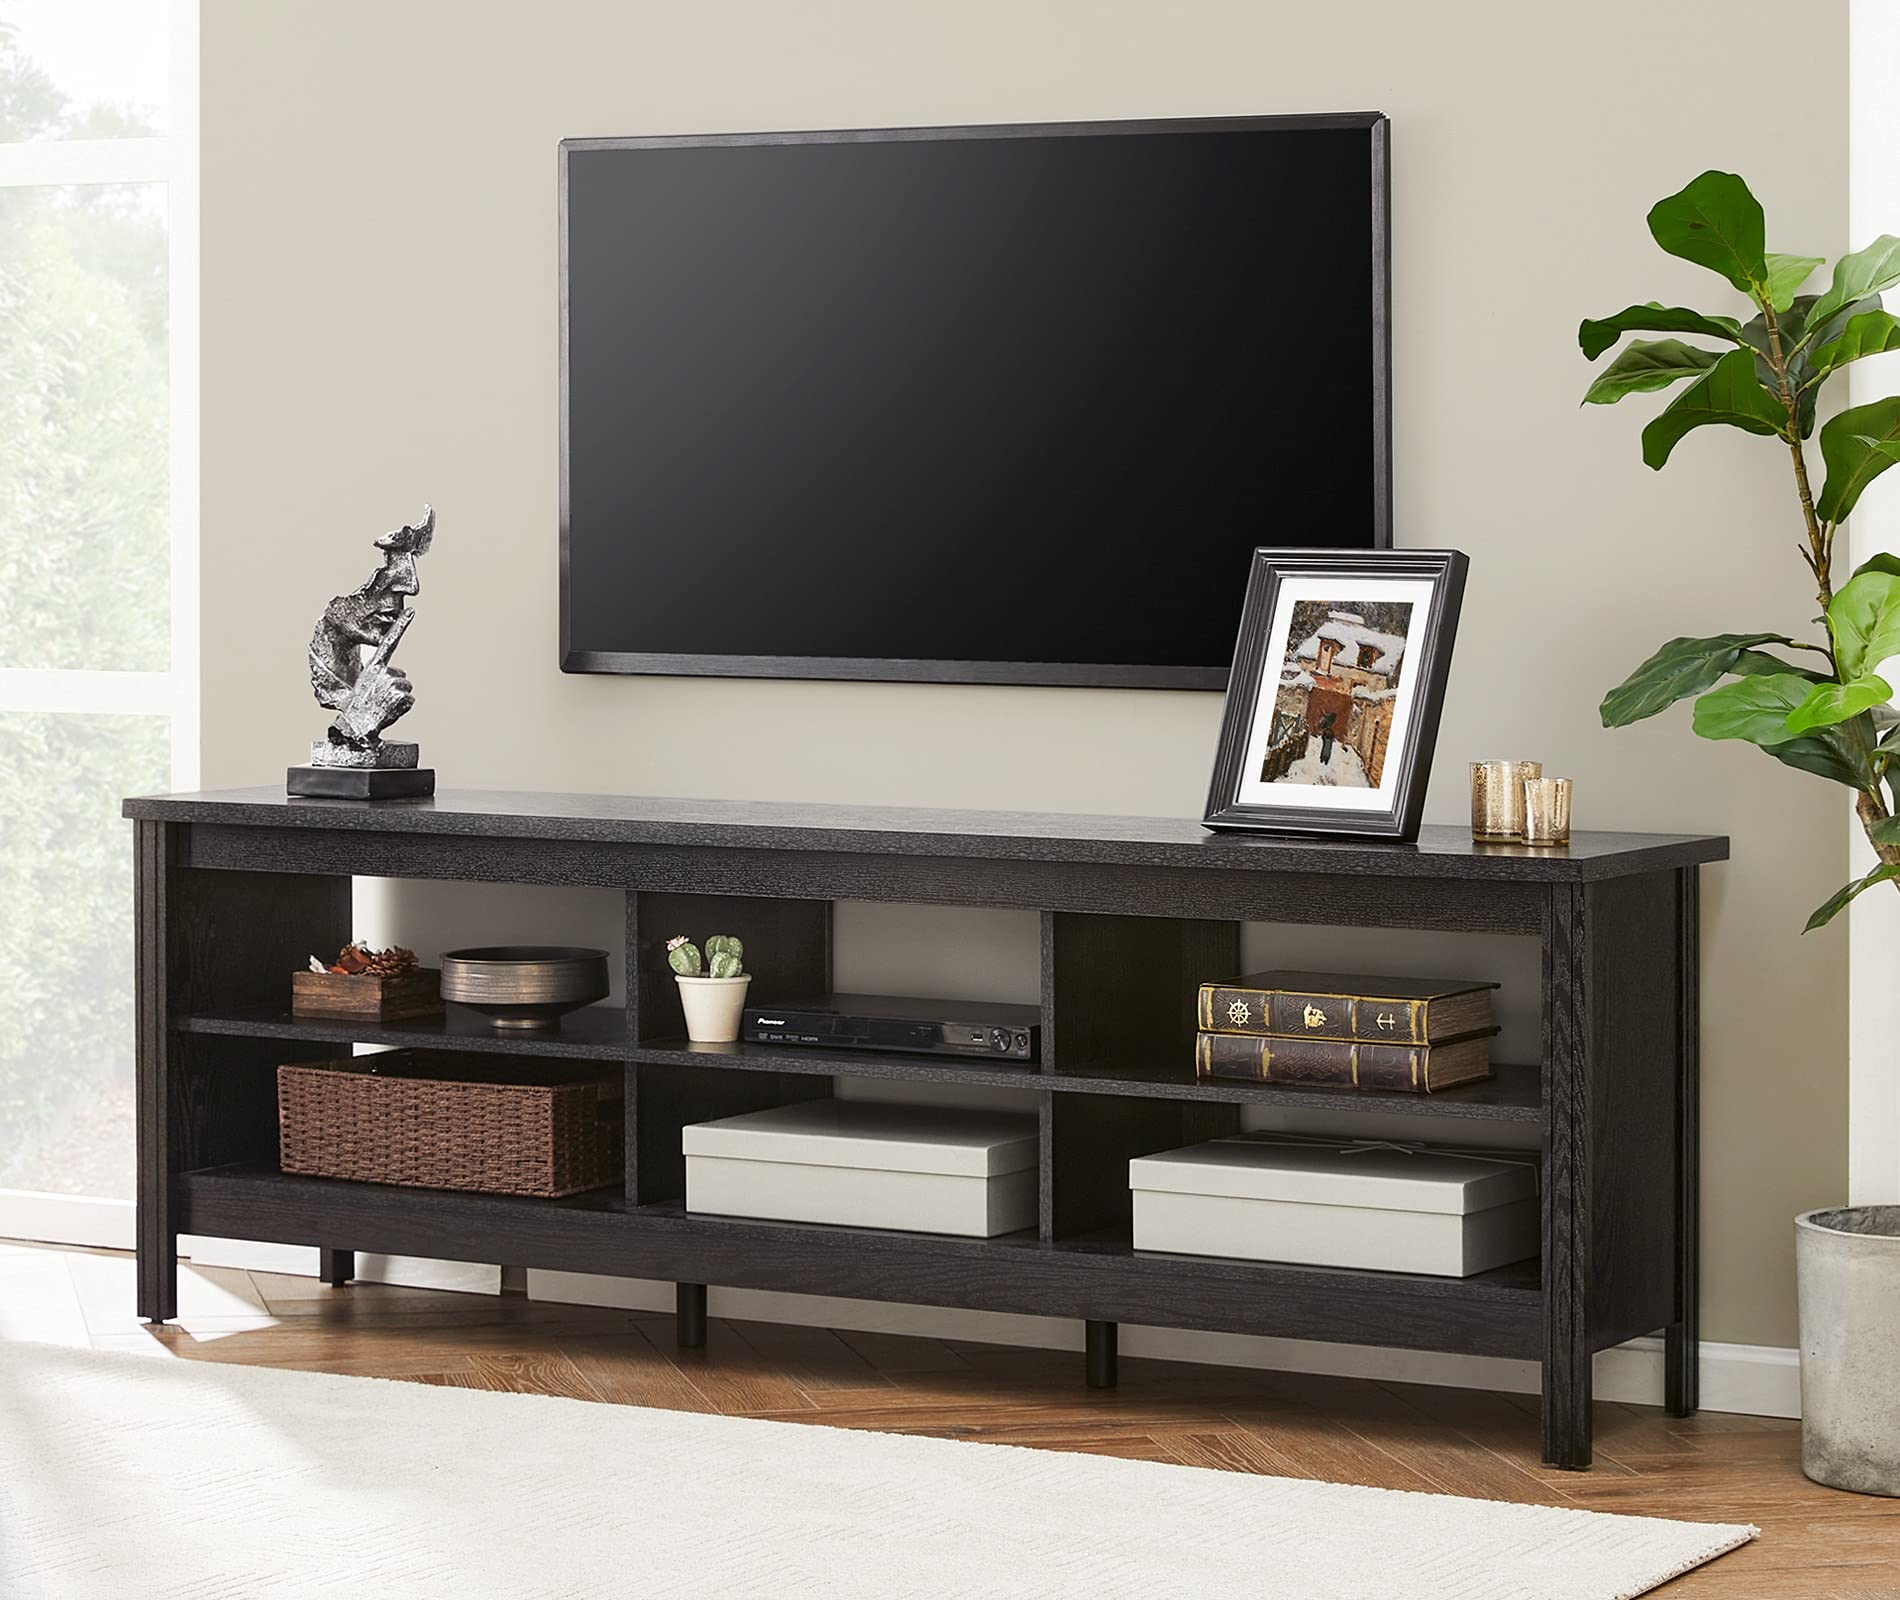 WAMPAT classic TV Stand for TVs up to 80 Inches, Black Entertainment center for 75 inch TV console Table with 6 cubby Storage fo